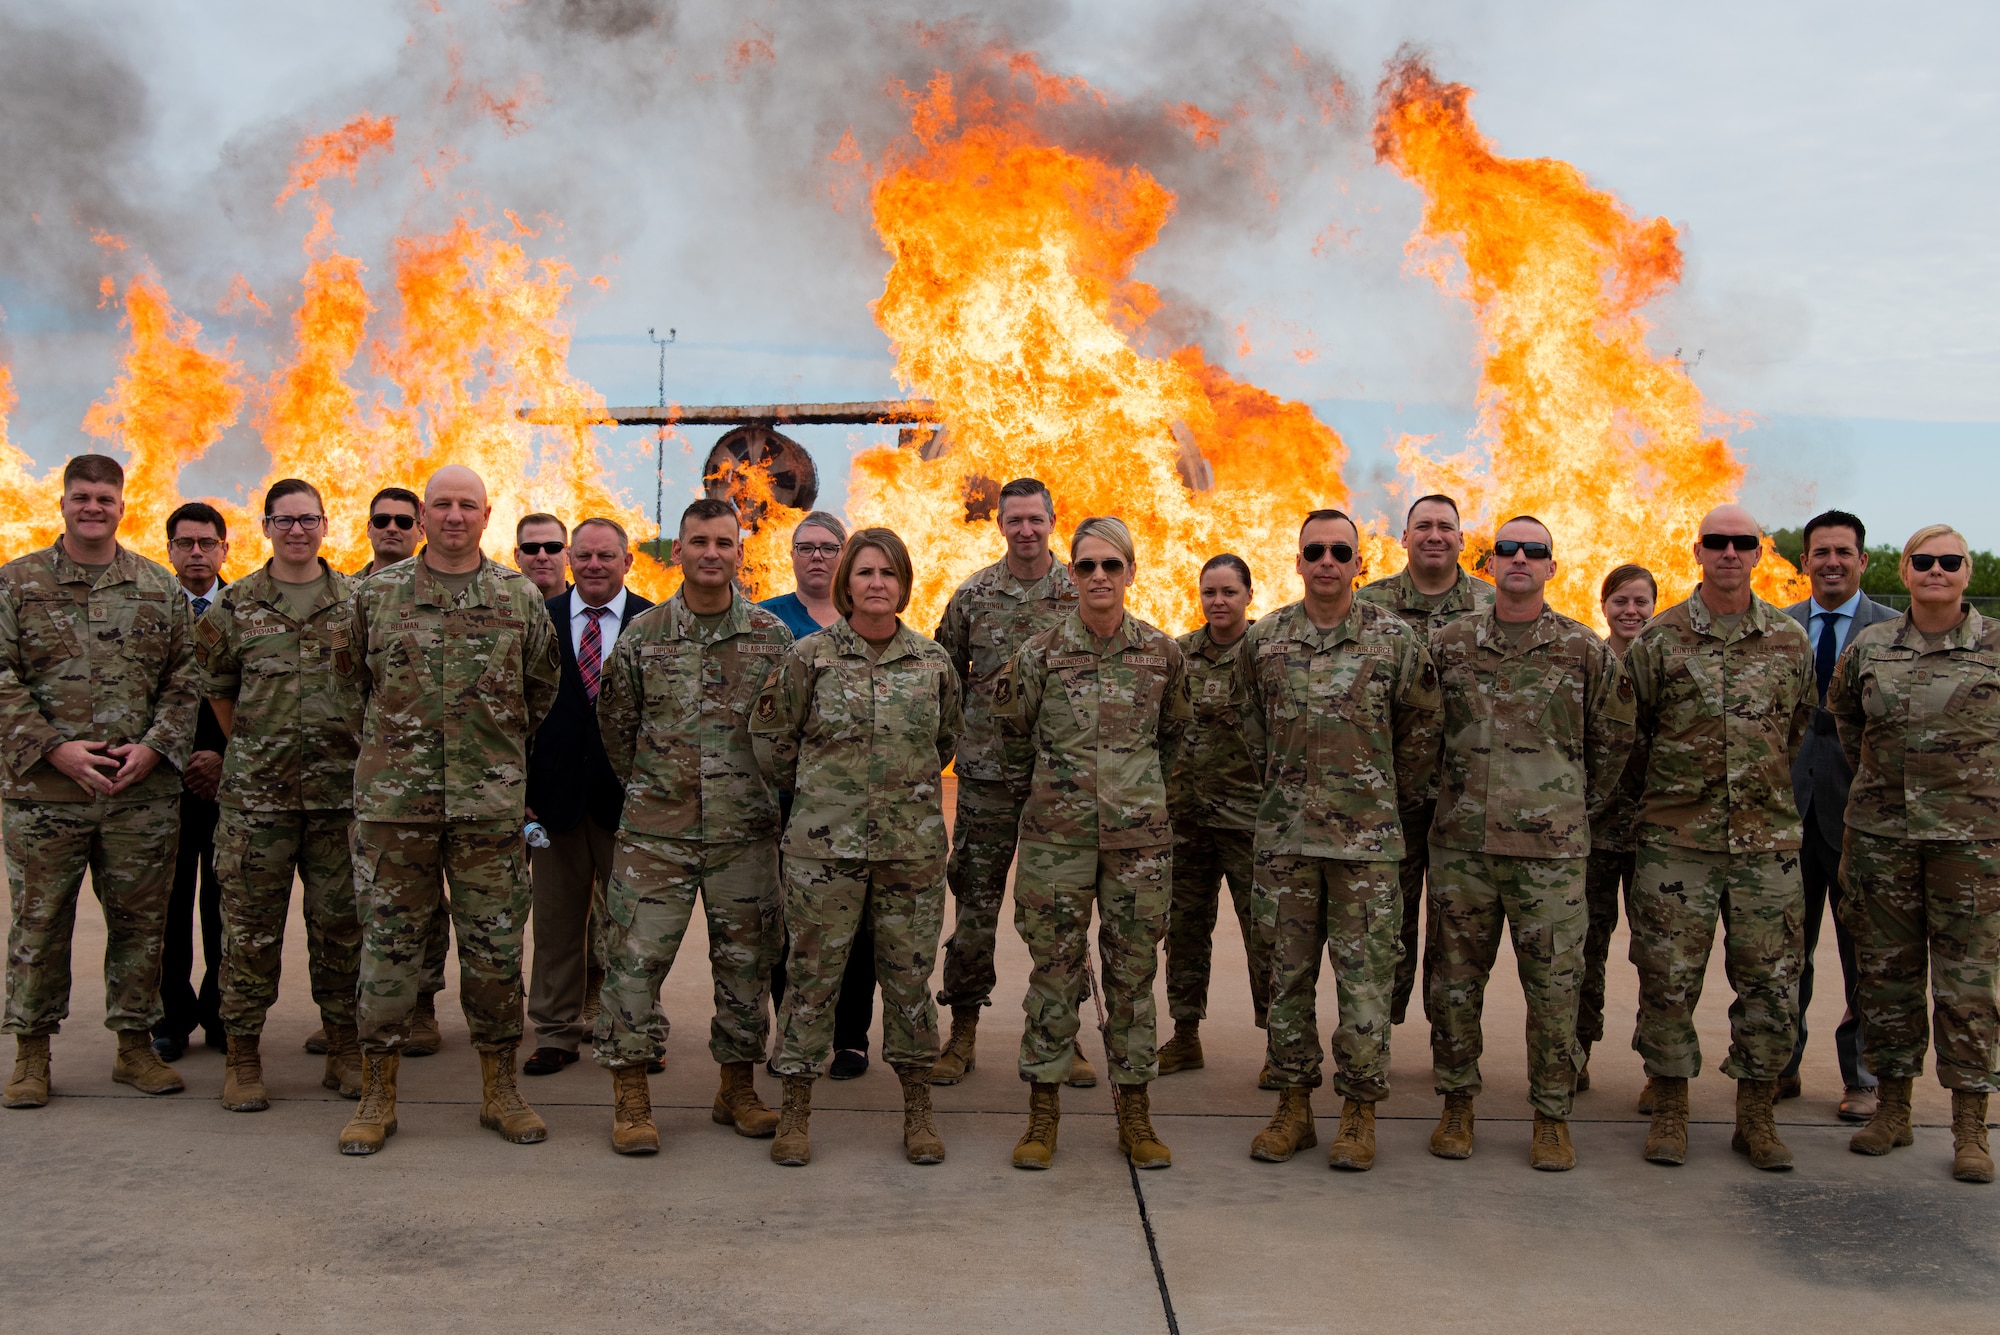 Leaders across Second Air Force, known as a Bazaar of Falcons, pose for a group photo at the Louis F. Garland DoD Fire Academy, Goodfellow Air Force Base, Texas, Aug. 25, 2022. They came together at Goodfellow for a week of collaboration and strategic planning to shape the future of Second Air Force. (U.S. Air Force photo by Senior Airman Michael Bowman)